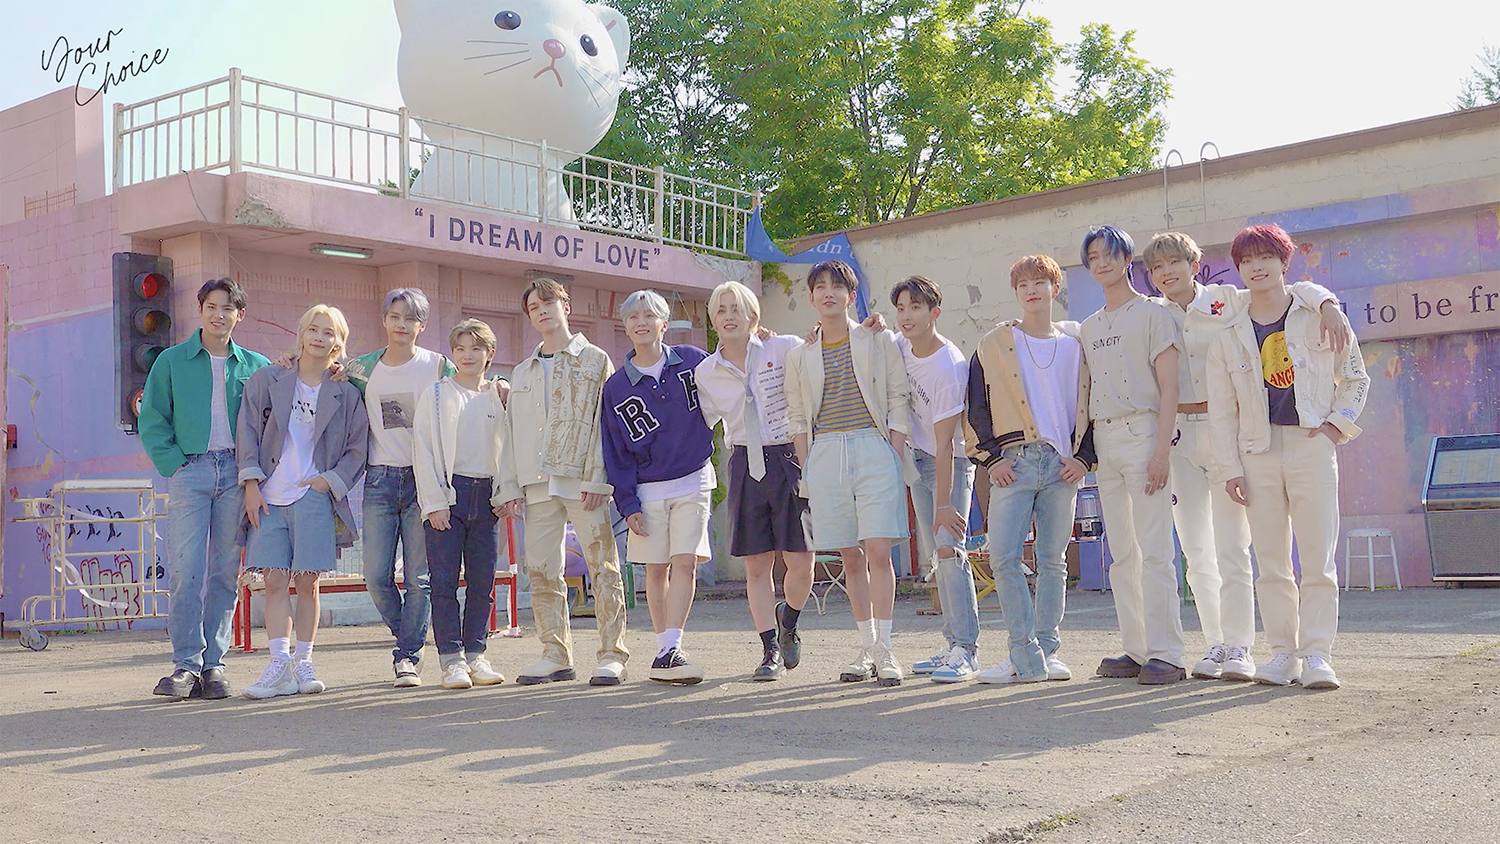 SEVENTEEN, 'Ready to love' choreography video released